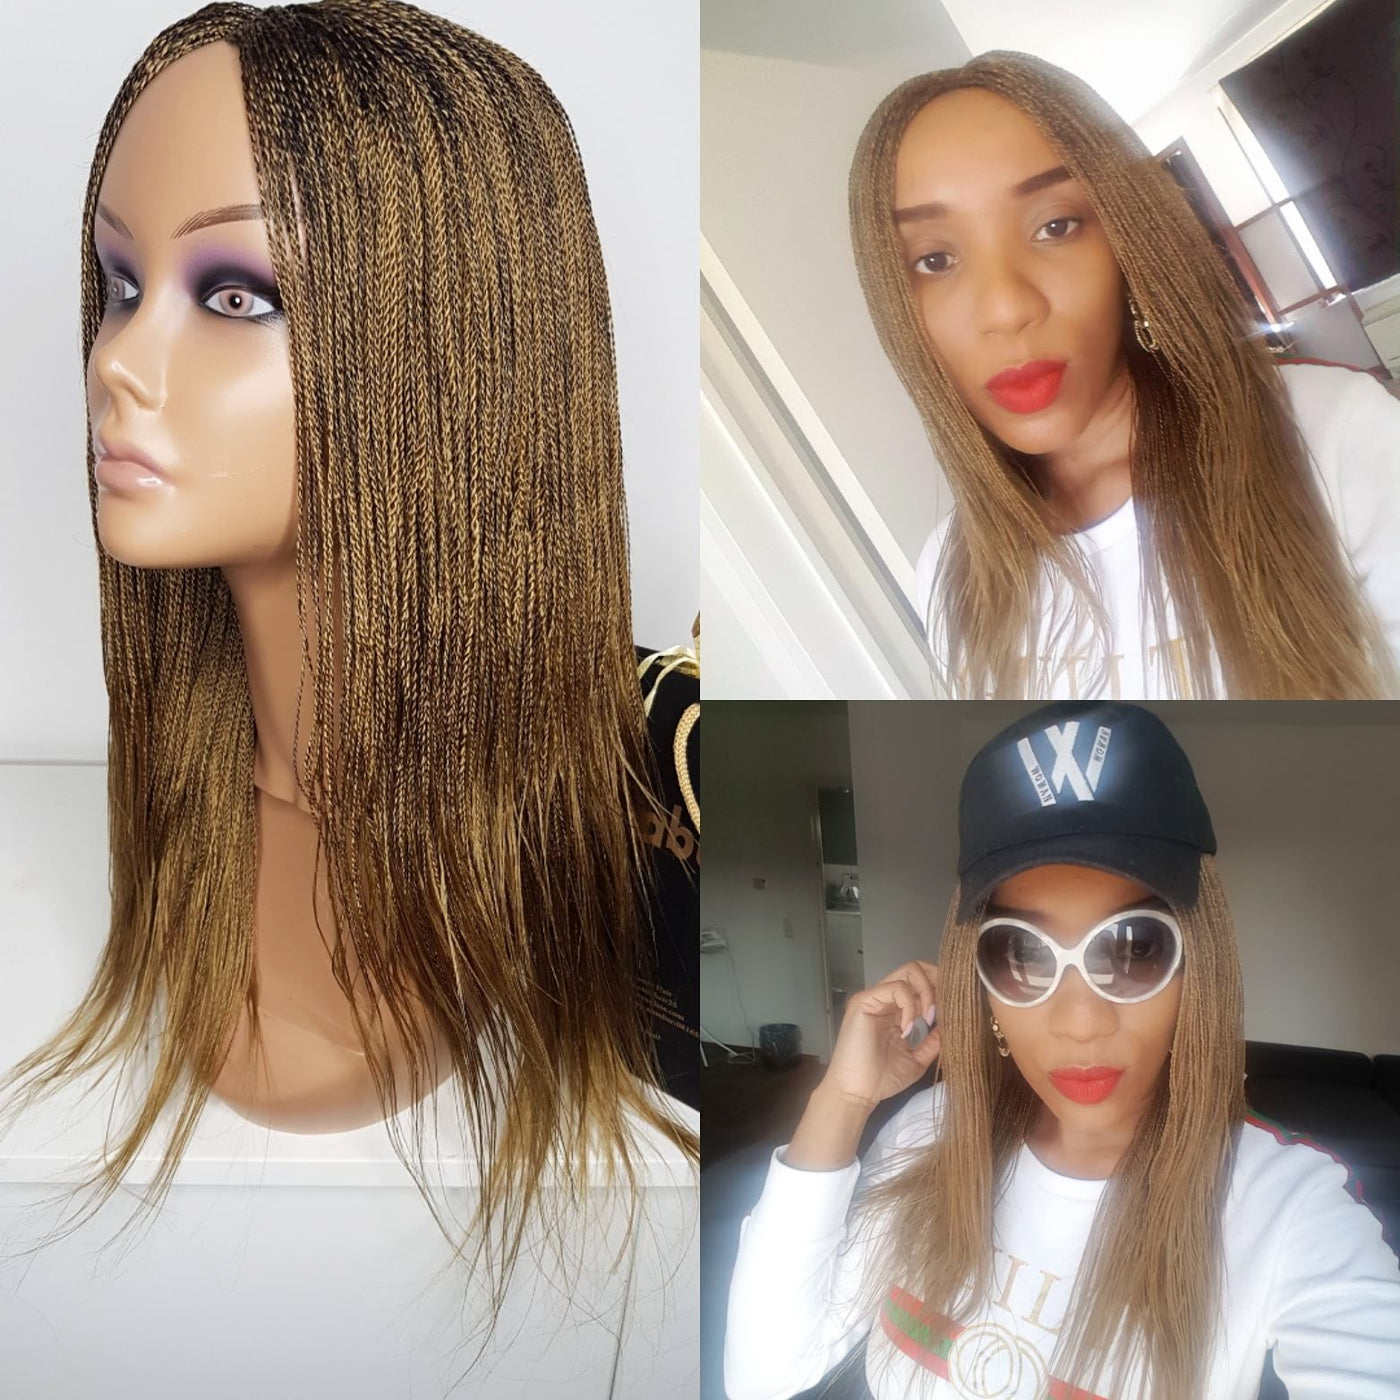 Braided wig in light brown colour